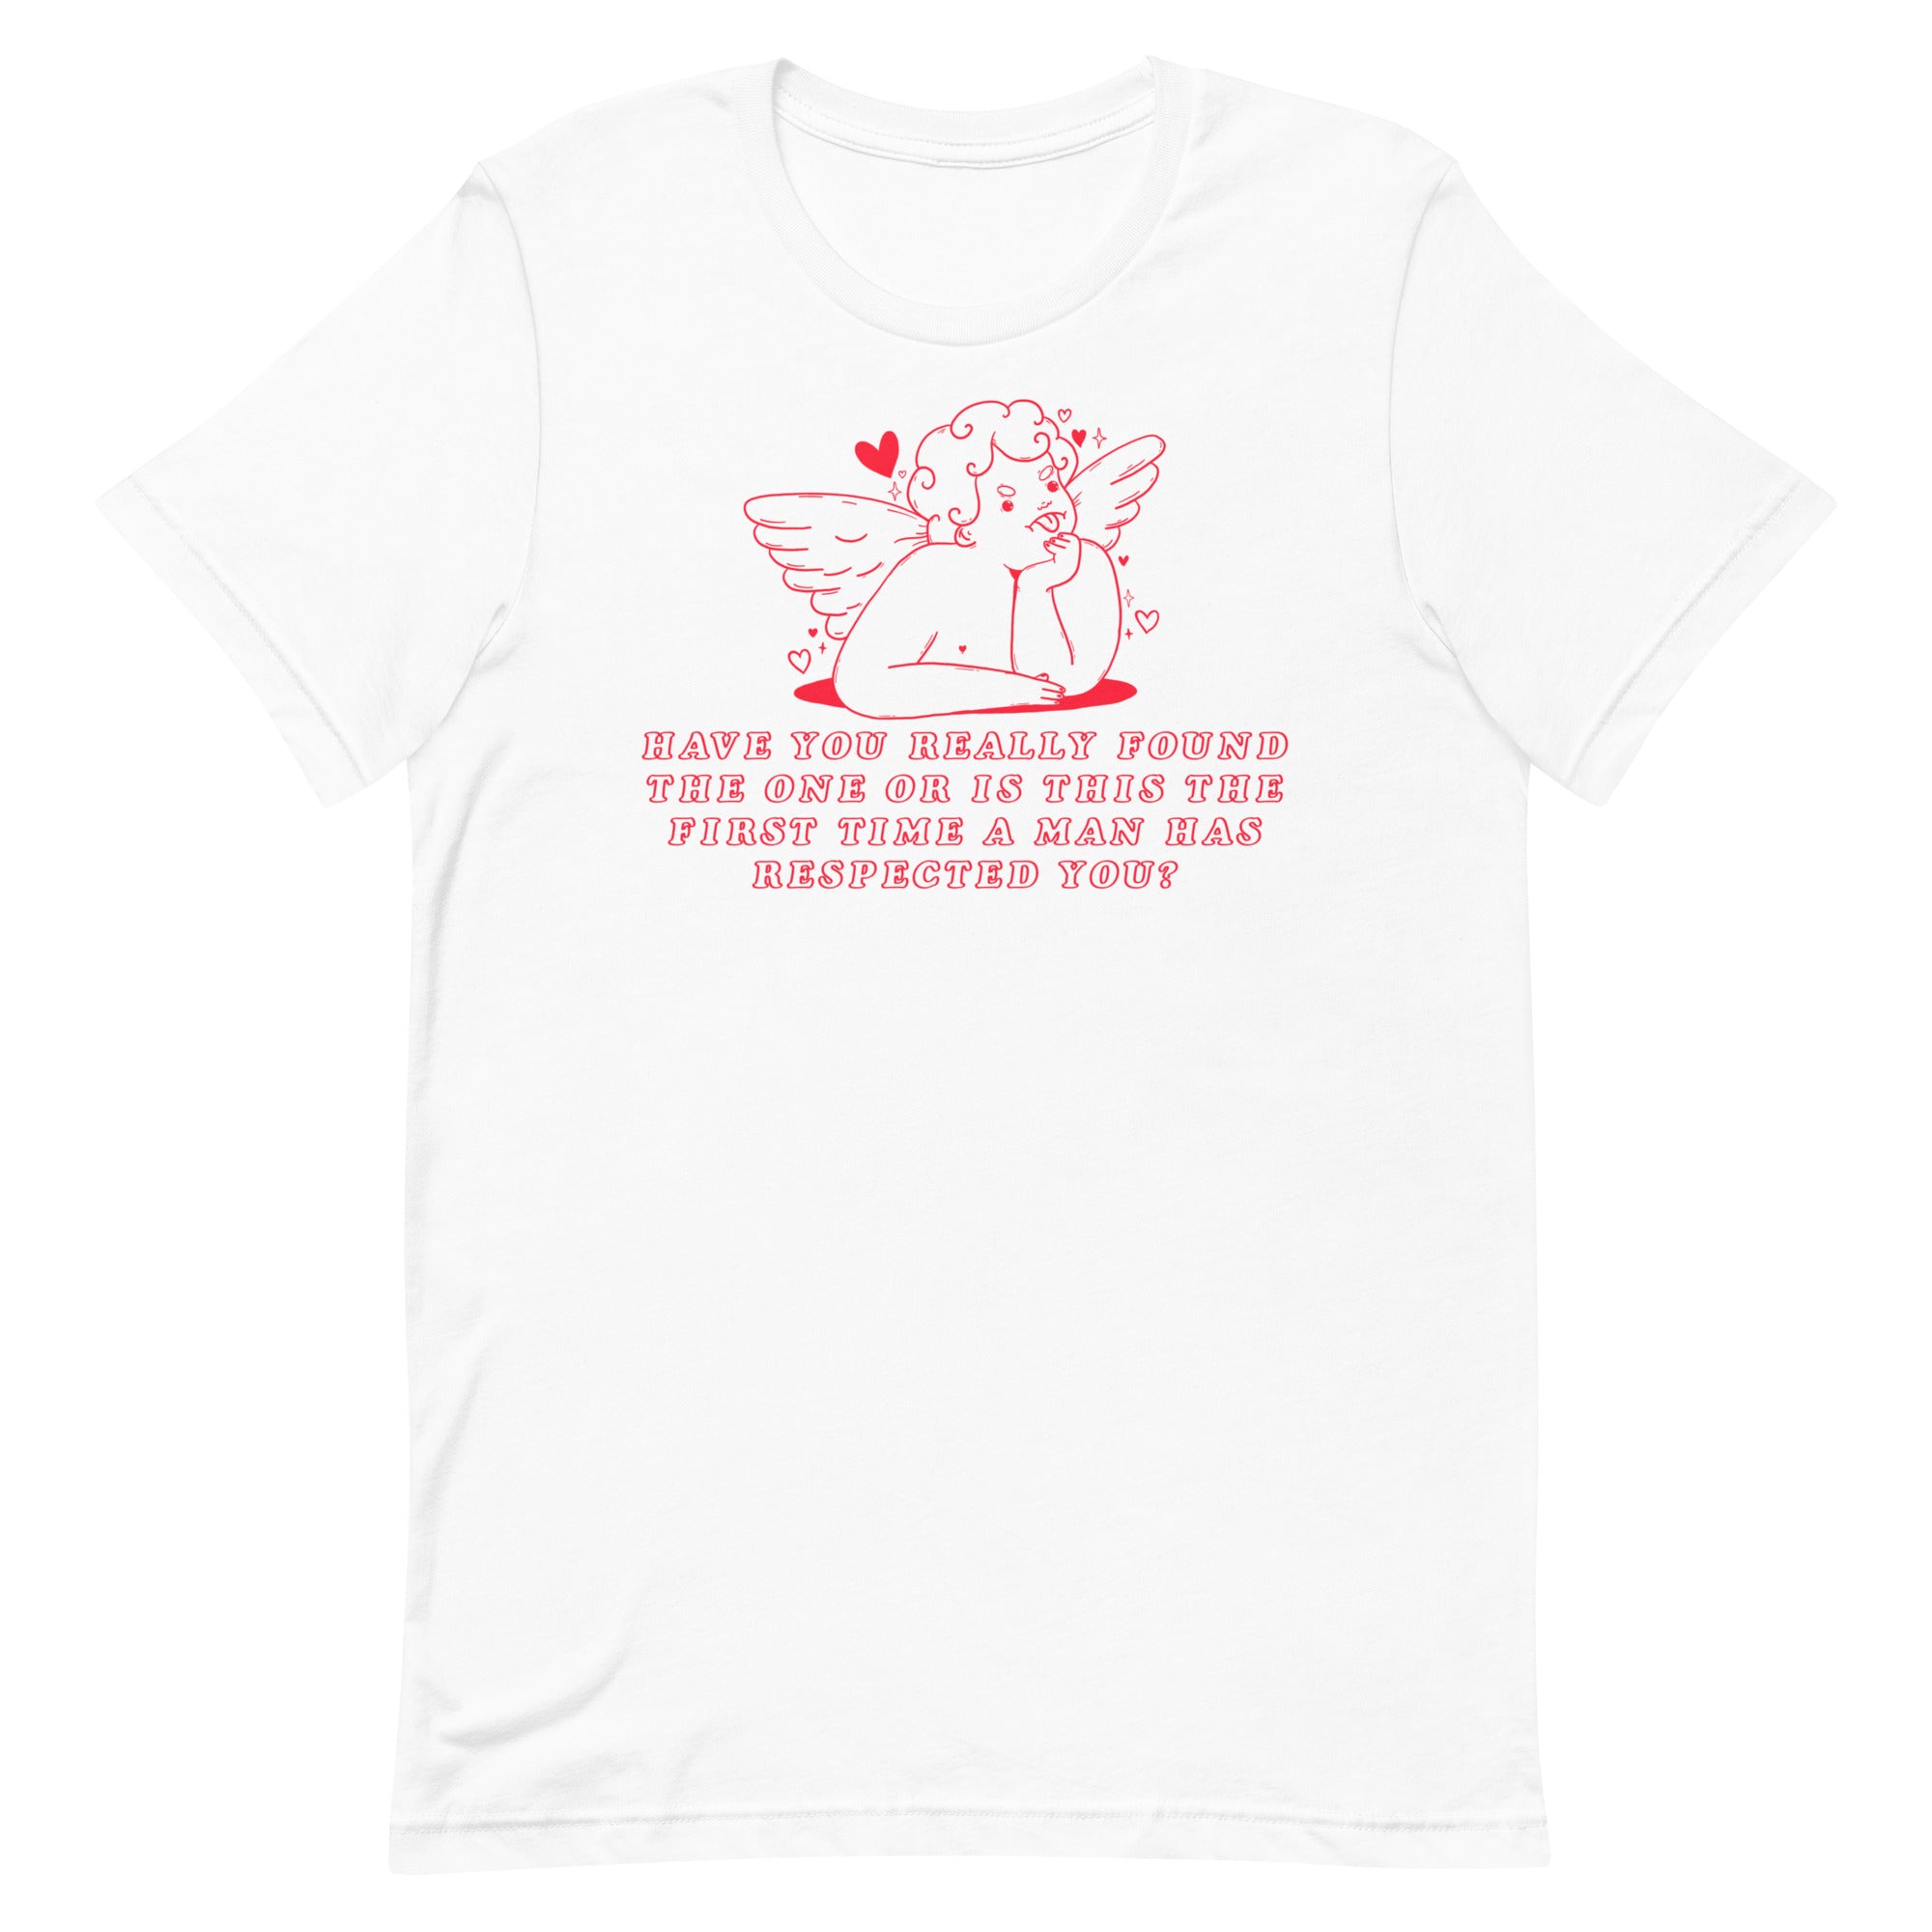 Have You Really Found The One? Unisex Feminist T-shirt - Shop Women’s Rights T-shirts - Feminist Trash Store - White